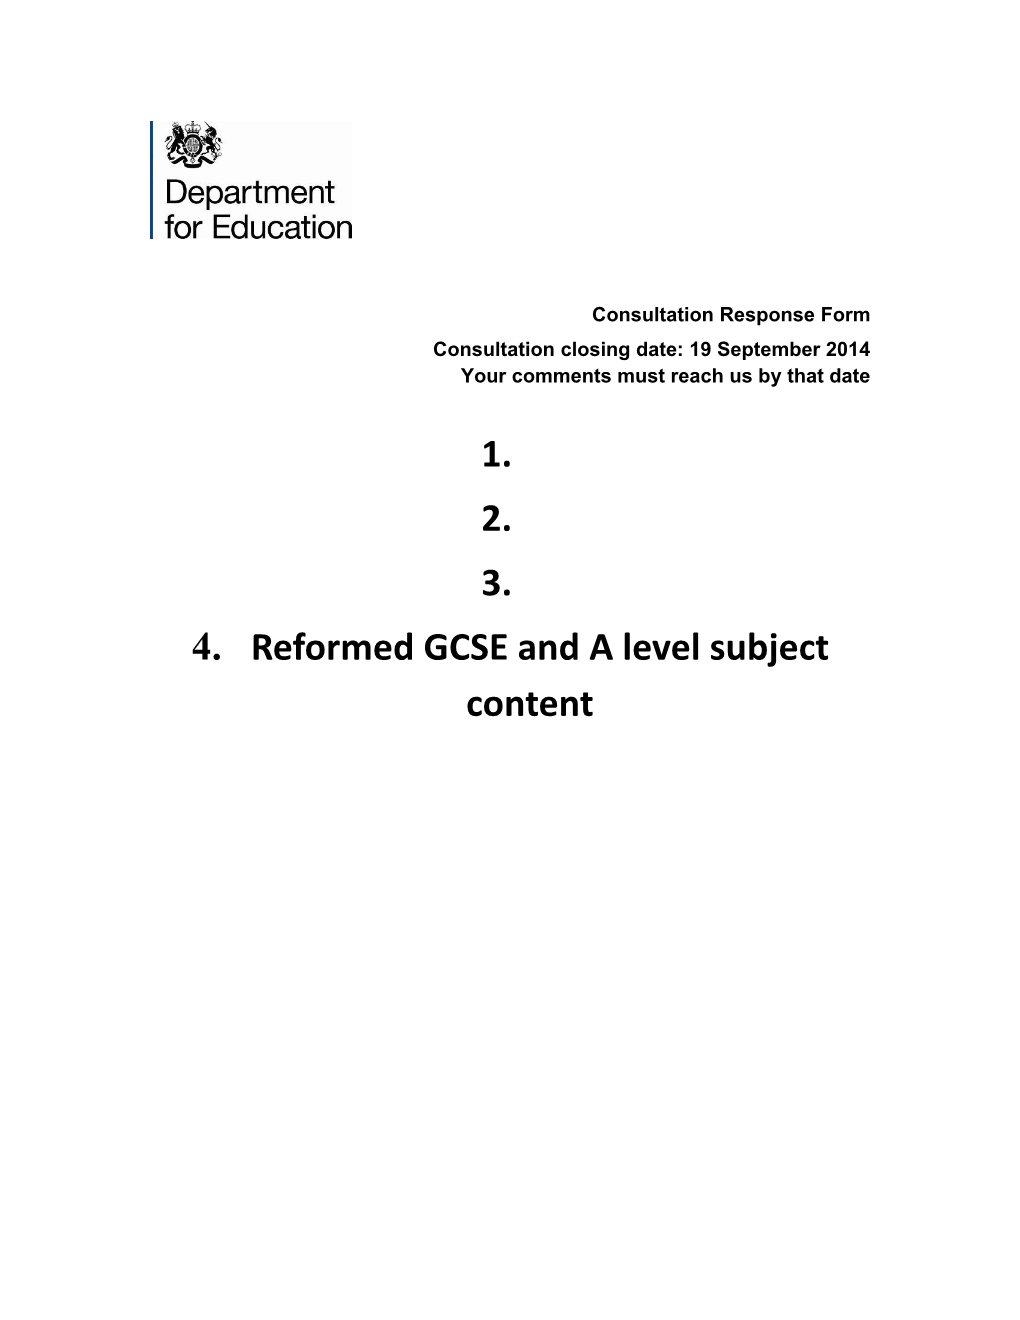 Reformed GCSE and a Level Subject Content